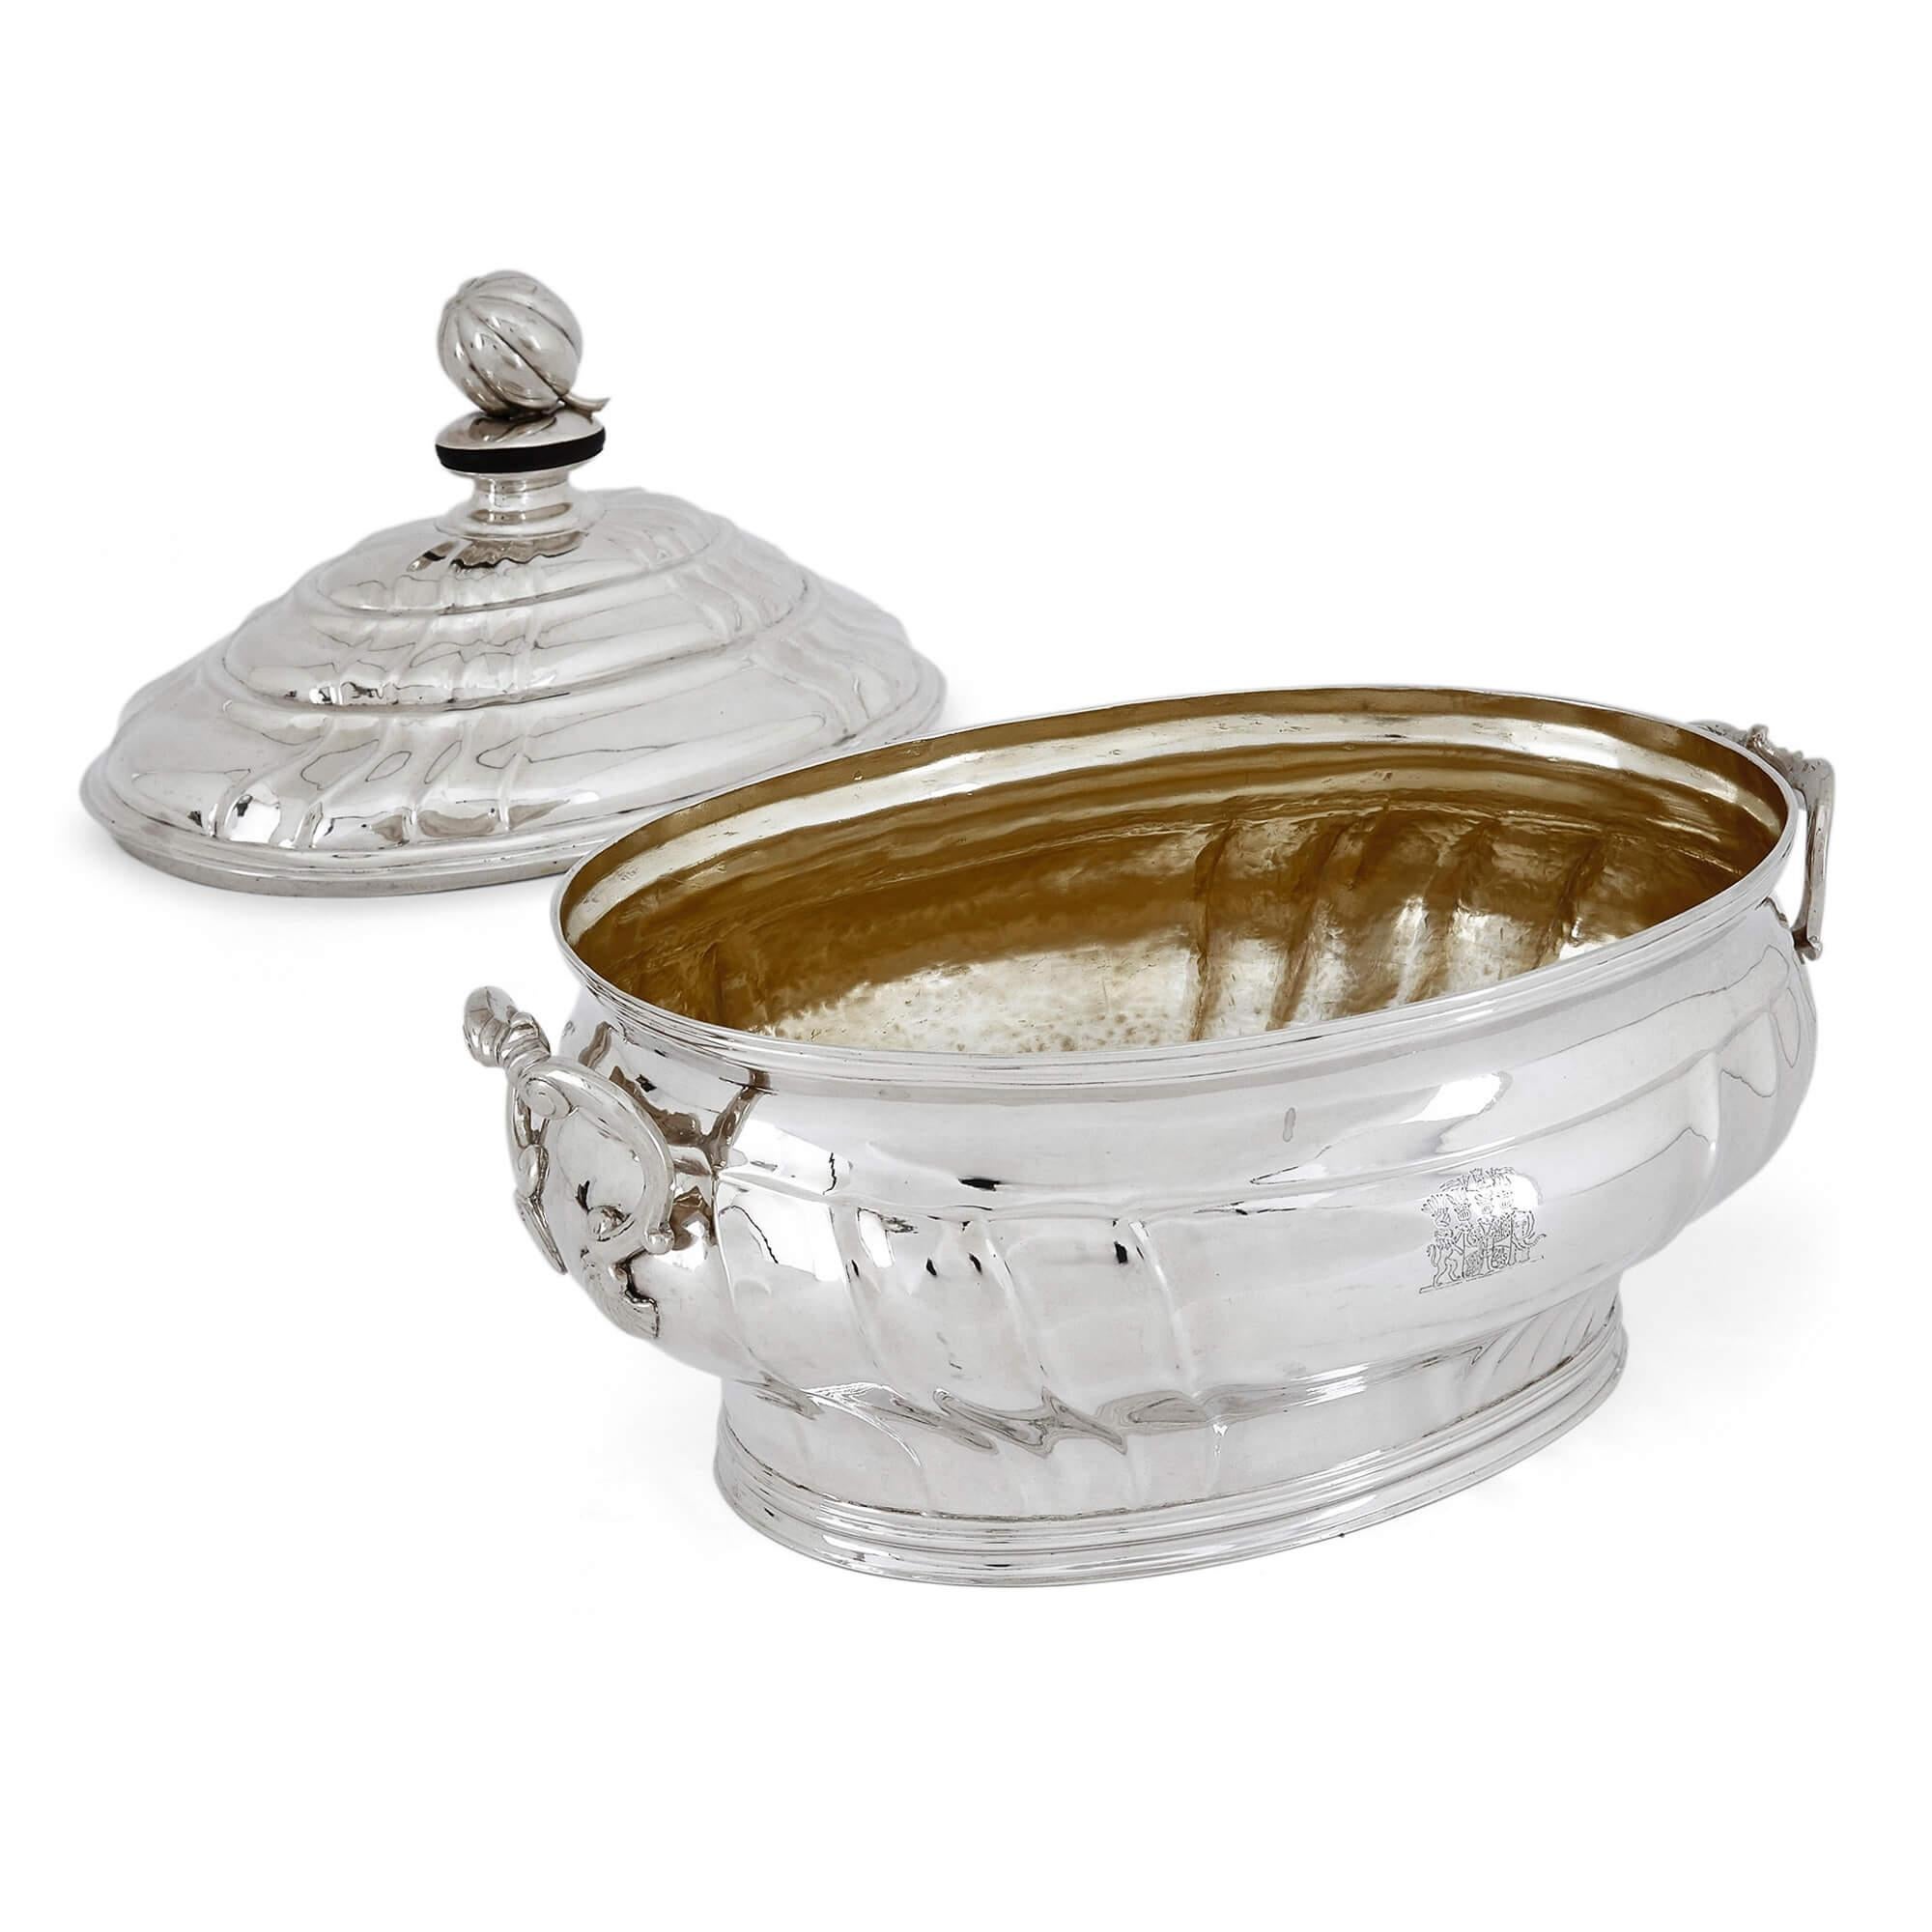 Pair of Rare Danish Eighteenth-Century Silver Soup Tureens with Trays For Sale 1